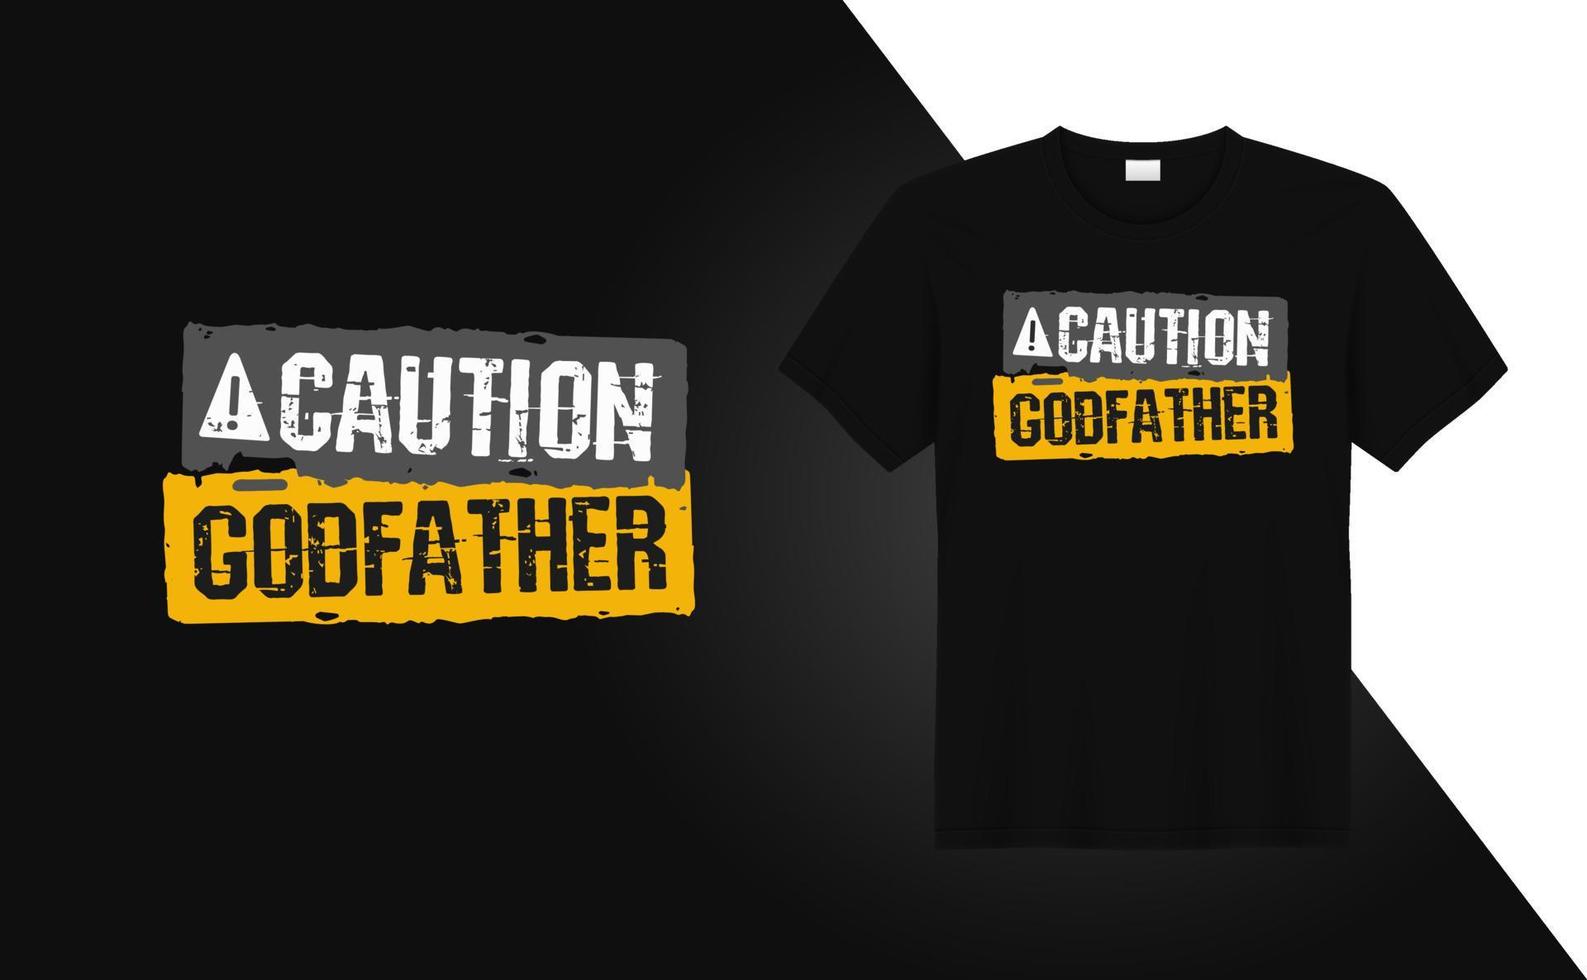 Caution Godfather vintage grunge effect t-shirt design for t-shirt printing, clothing fashion, Poster, Wall art. Vector illustration art for t-shirt.